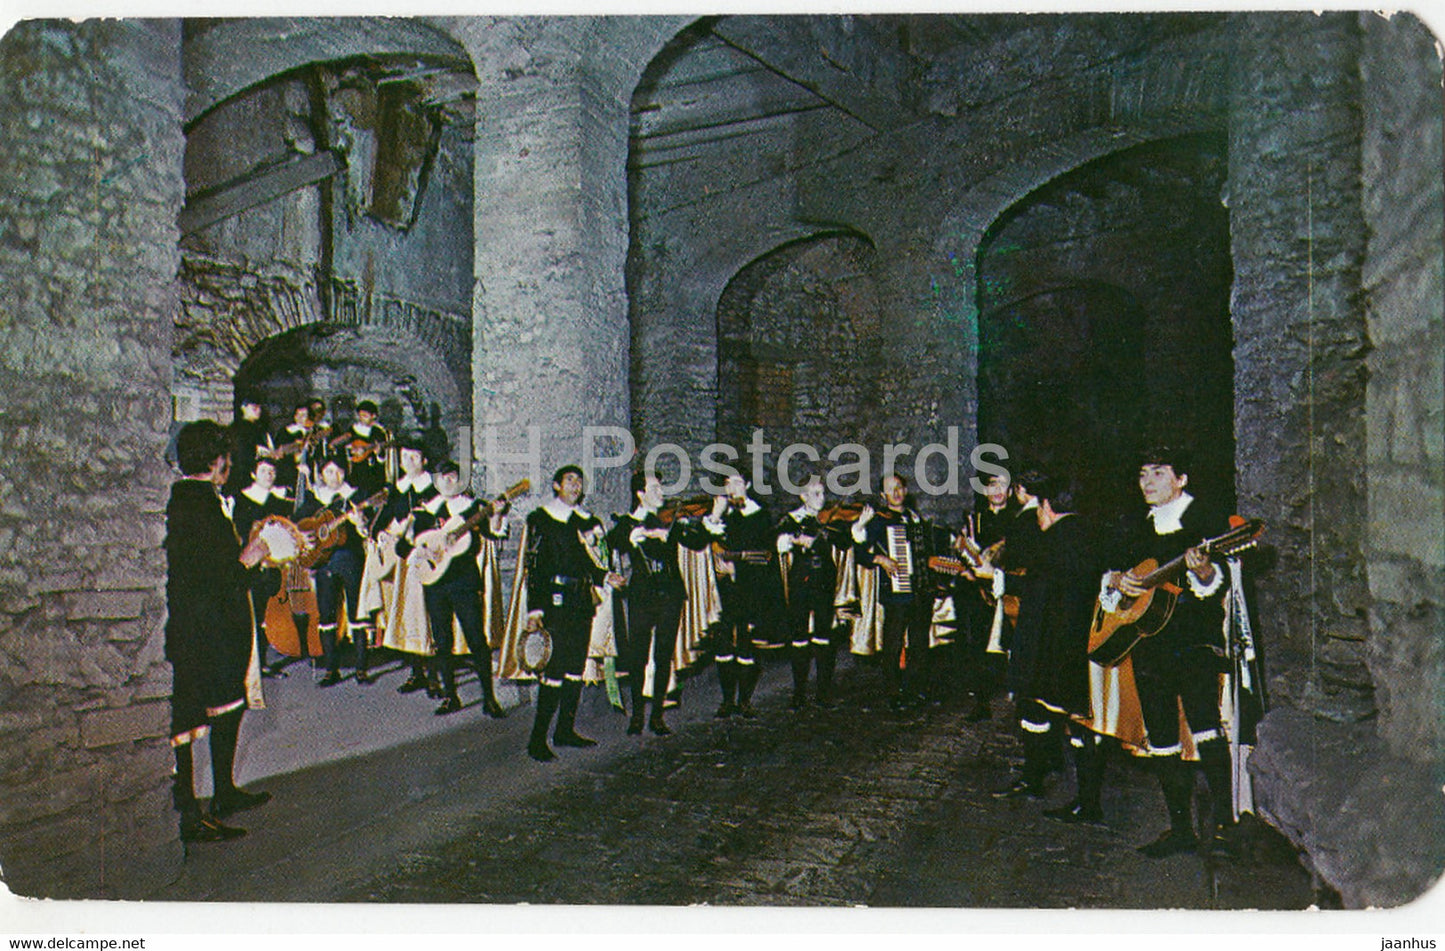 Estudiana de Guanajuato en Serenata - Strolling Band of Students Playing and Singing in the Night - Mexico - unused - JH Postcards